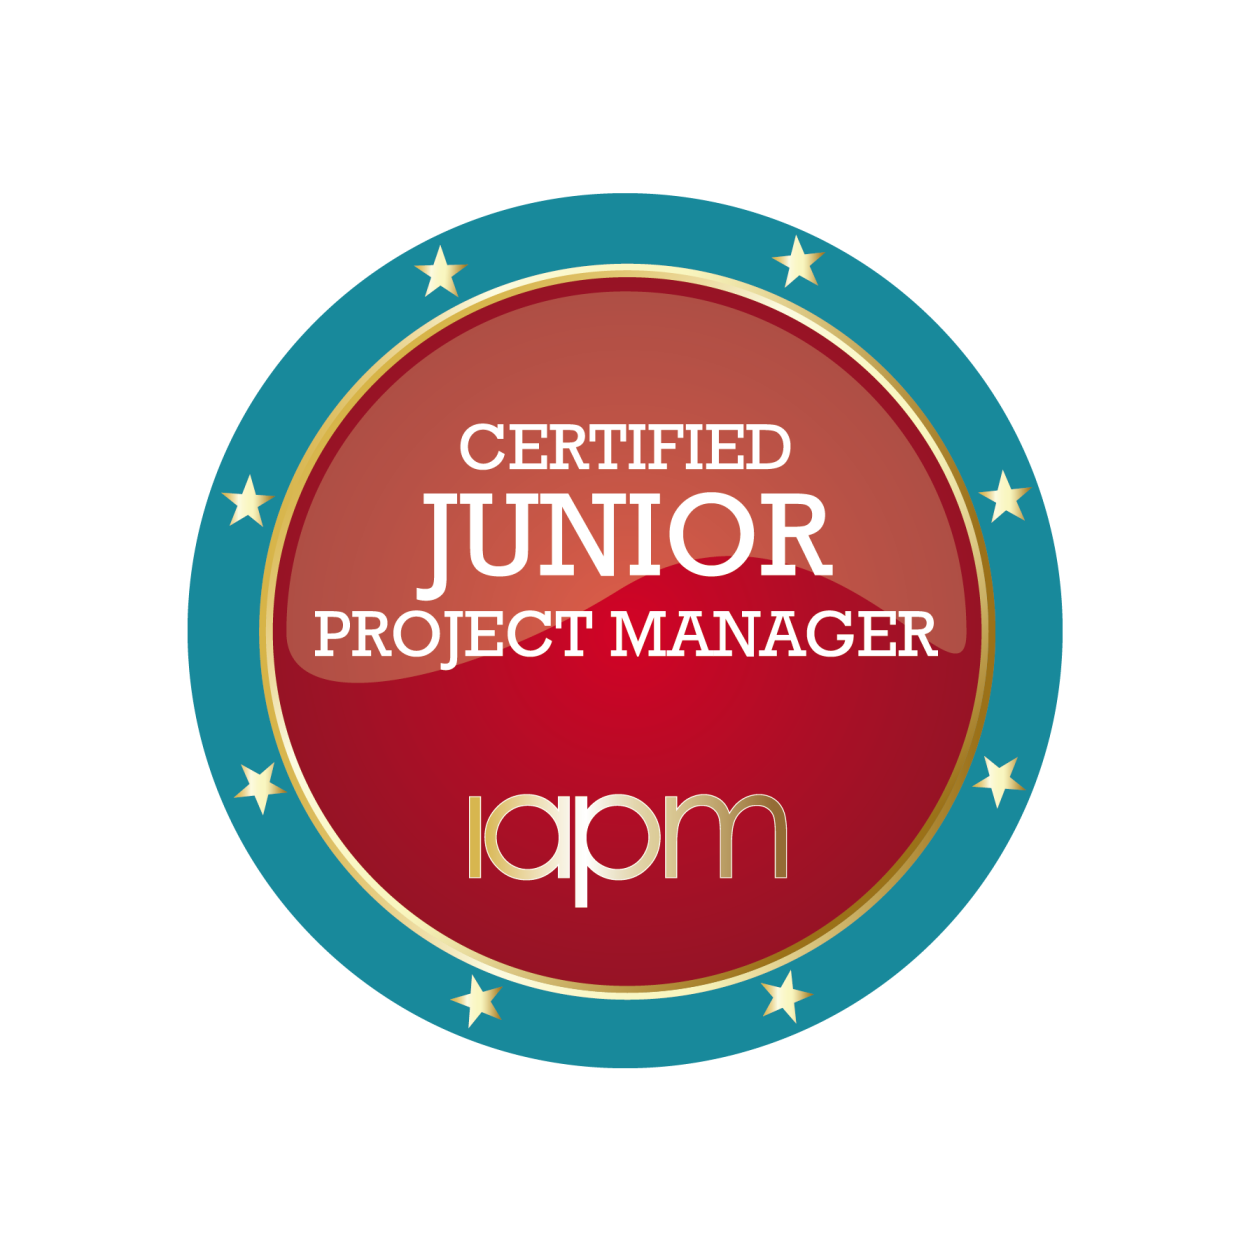 The badge of the 'Certified Junior Project Manager (IAPM)'.